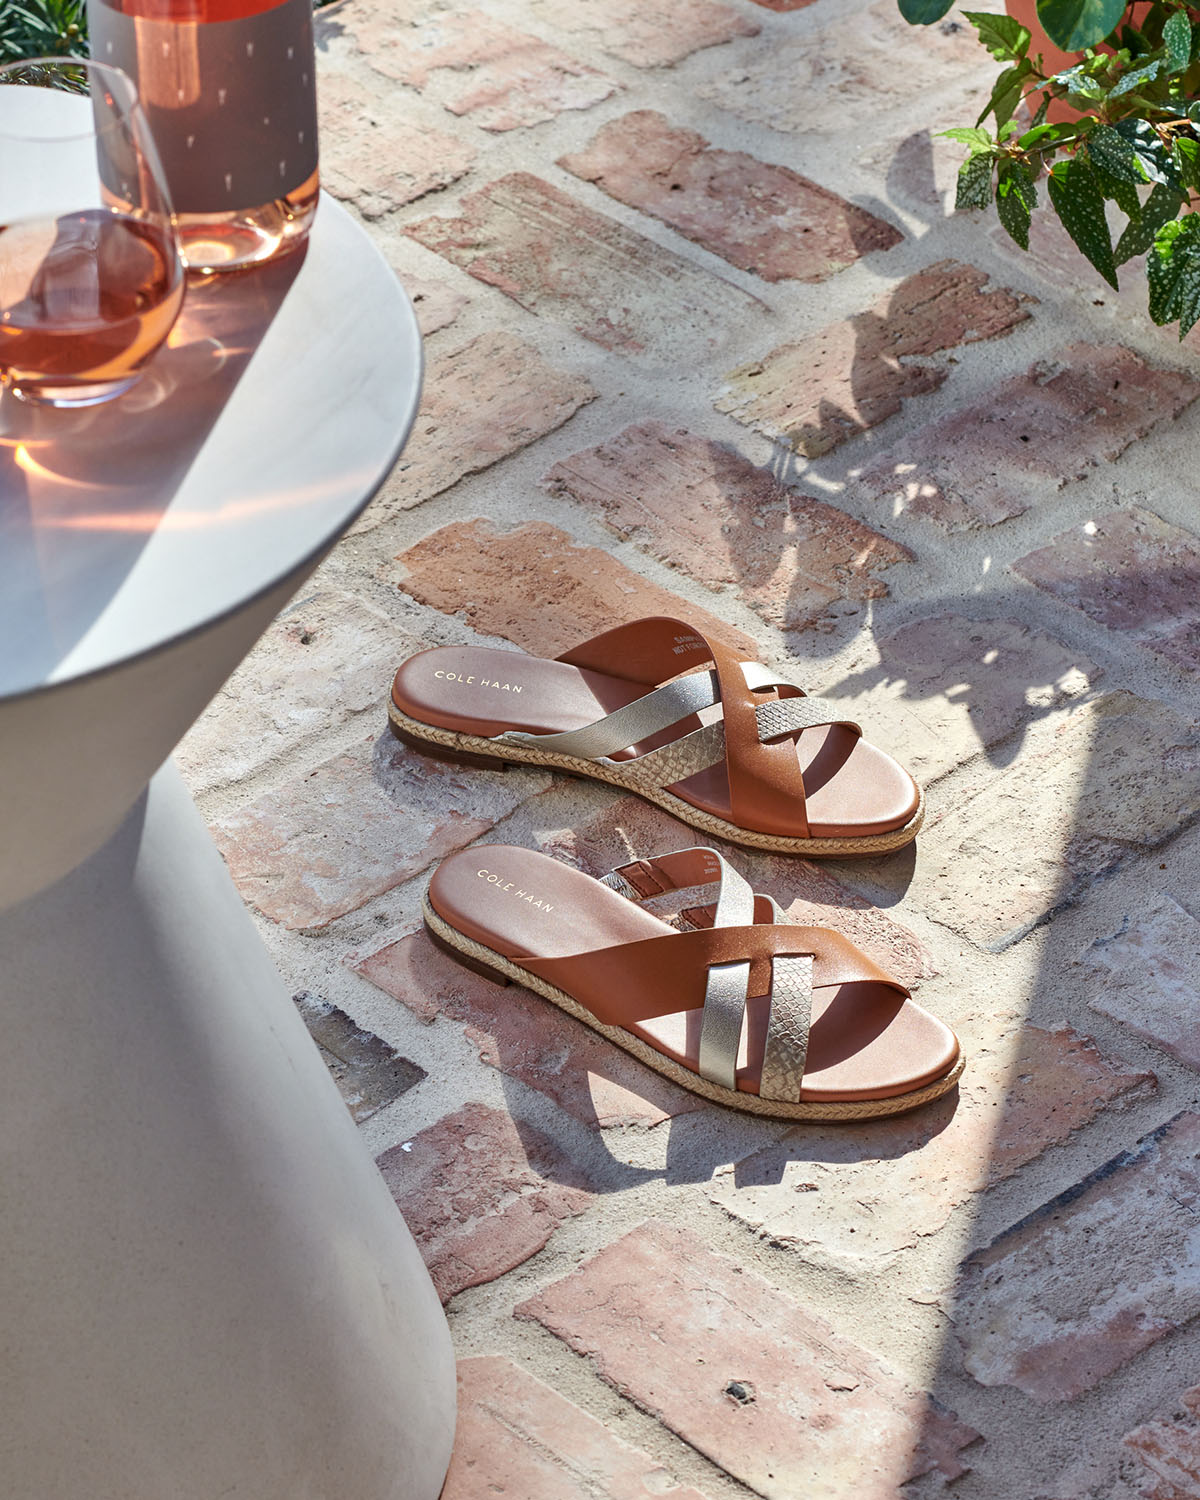 Sandals on brick porch in sunlight  by  Alison Gootee Photography